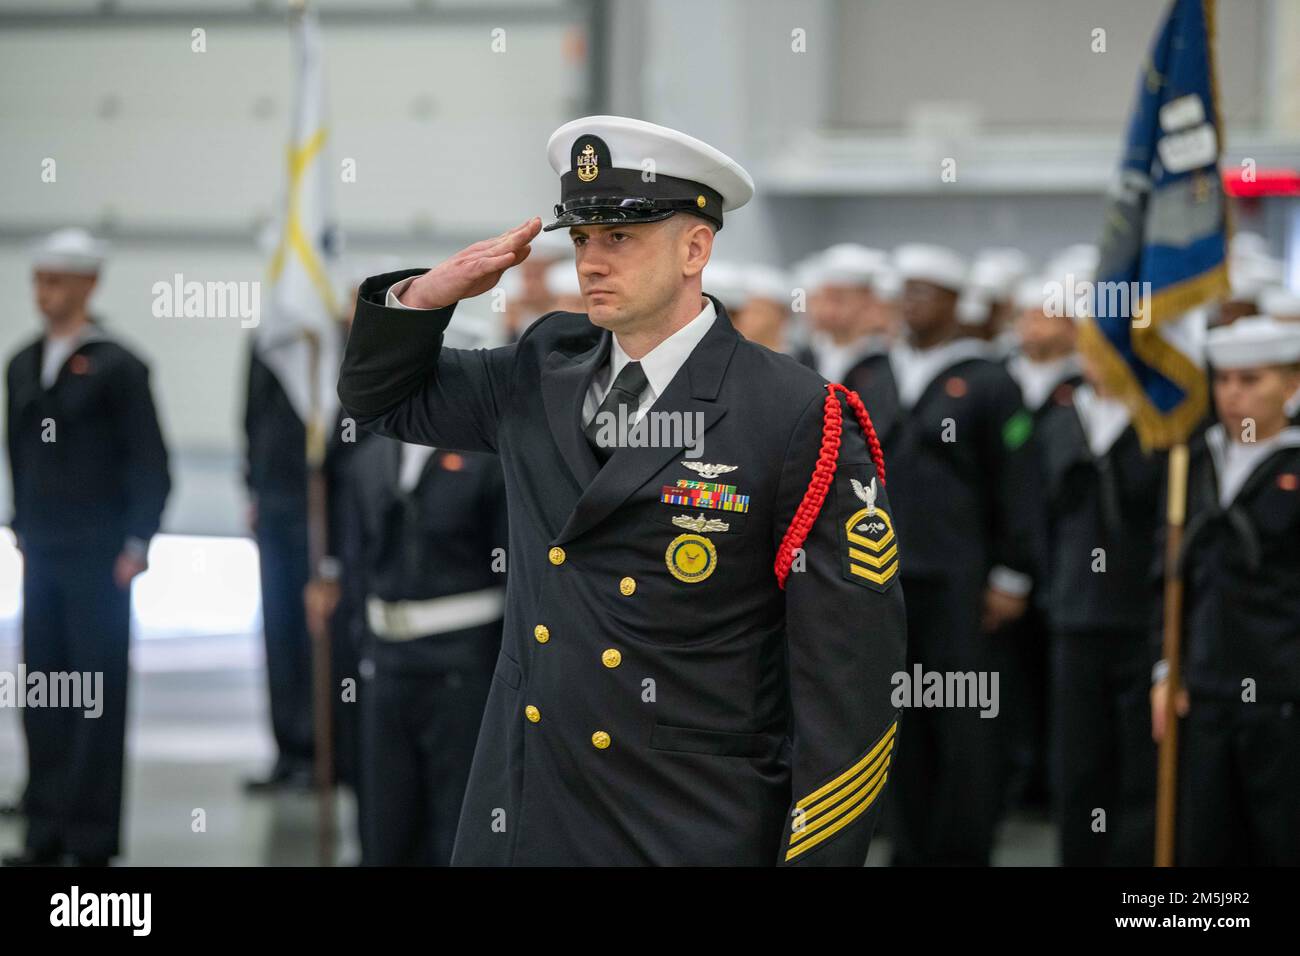 Chief Aviation Structural Mechanic Edison Owen, a recruit division commander, salutes inside Midway Drill Hall during a pass-in-review graduation ceremony at Recruit Training Command. More than 40,000 recruits train annually at the Navy's only boot camp. Stock Photo